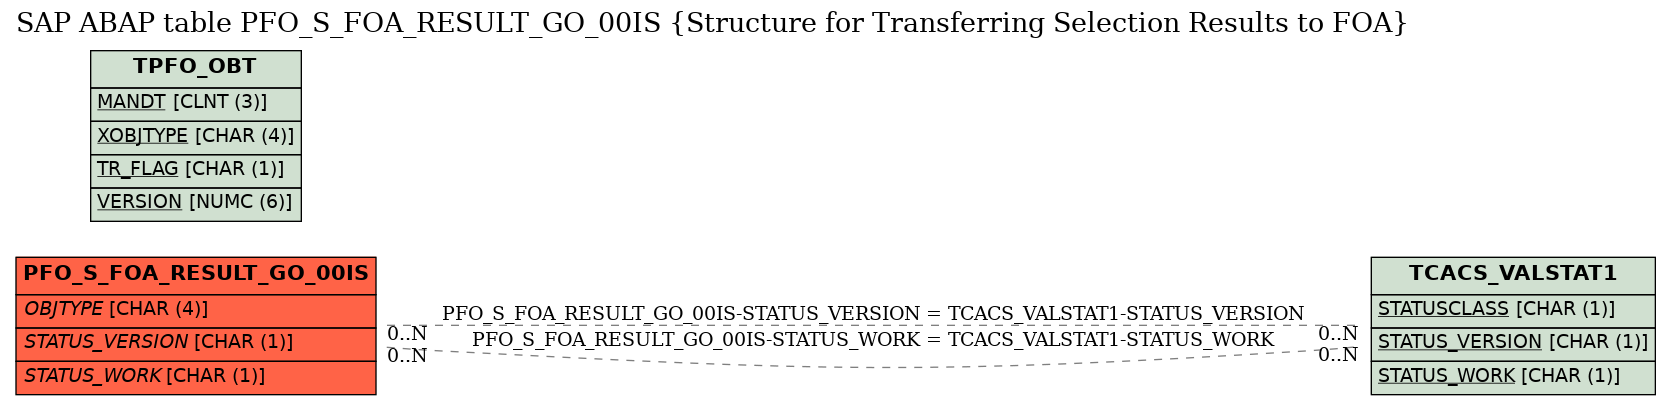 E-R Diagram for table PFO_S_FOA_RESULT_GO_00IS (Structure for Transferring Selection Results to FOA)